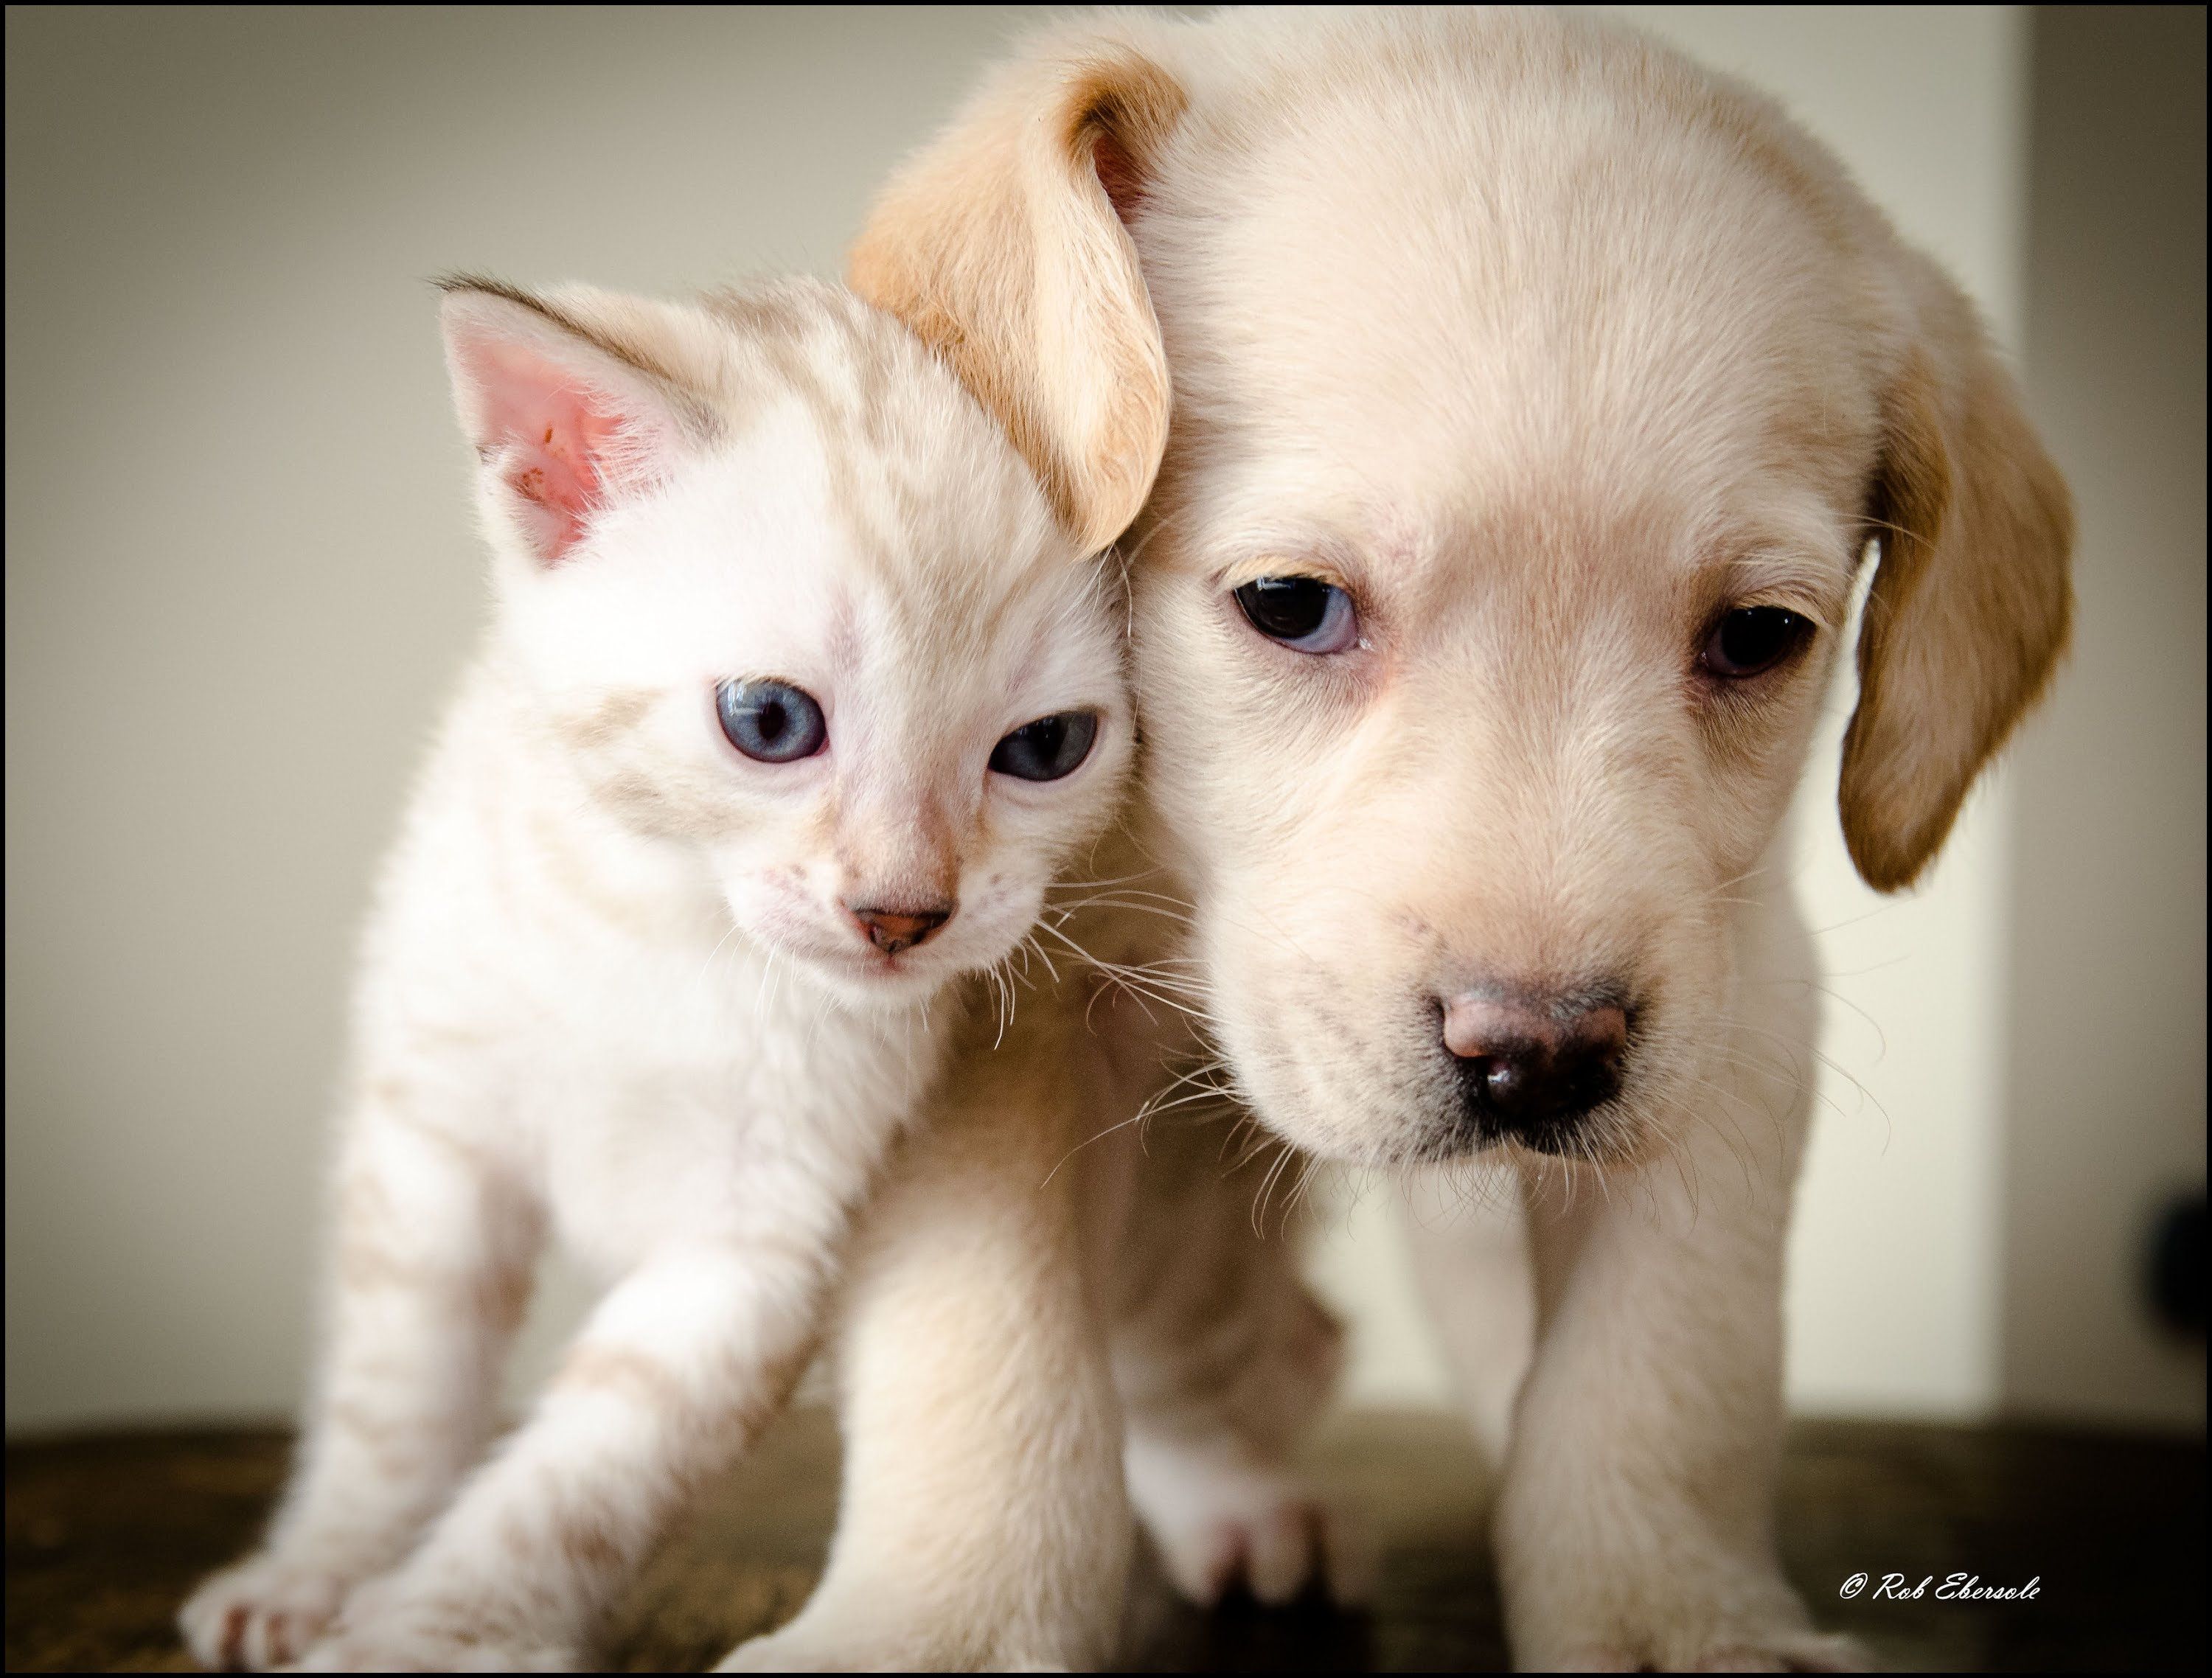 Wallpaper Of Puppies And Kittens